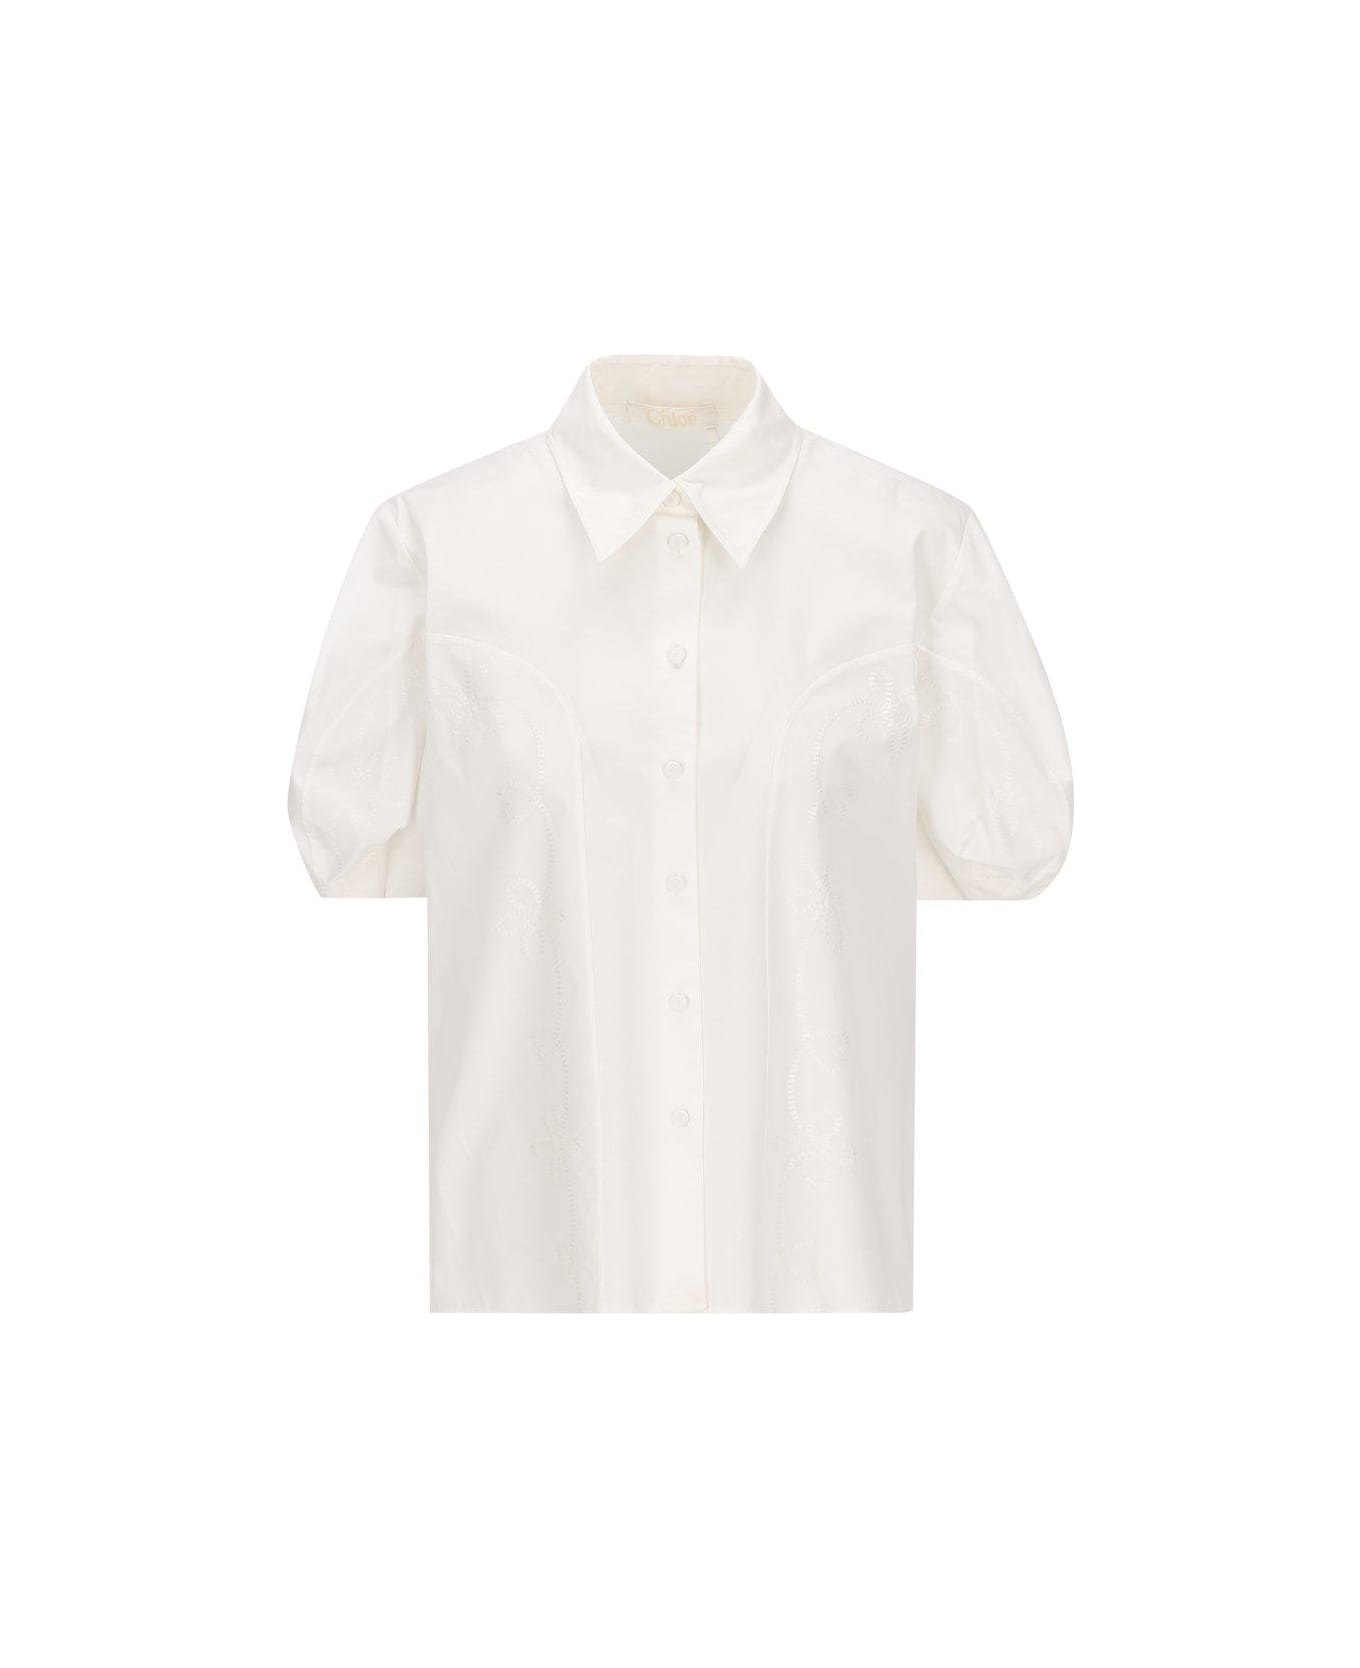 Chloé Embroidered Balloon-sleeved Shirt - Iconic Milk シャツ